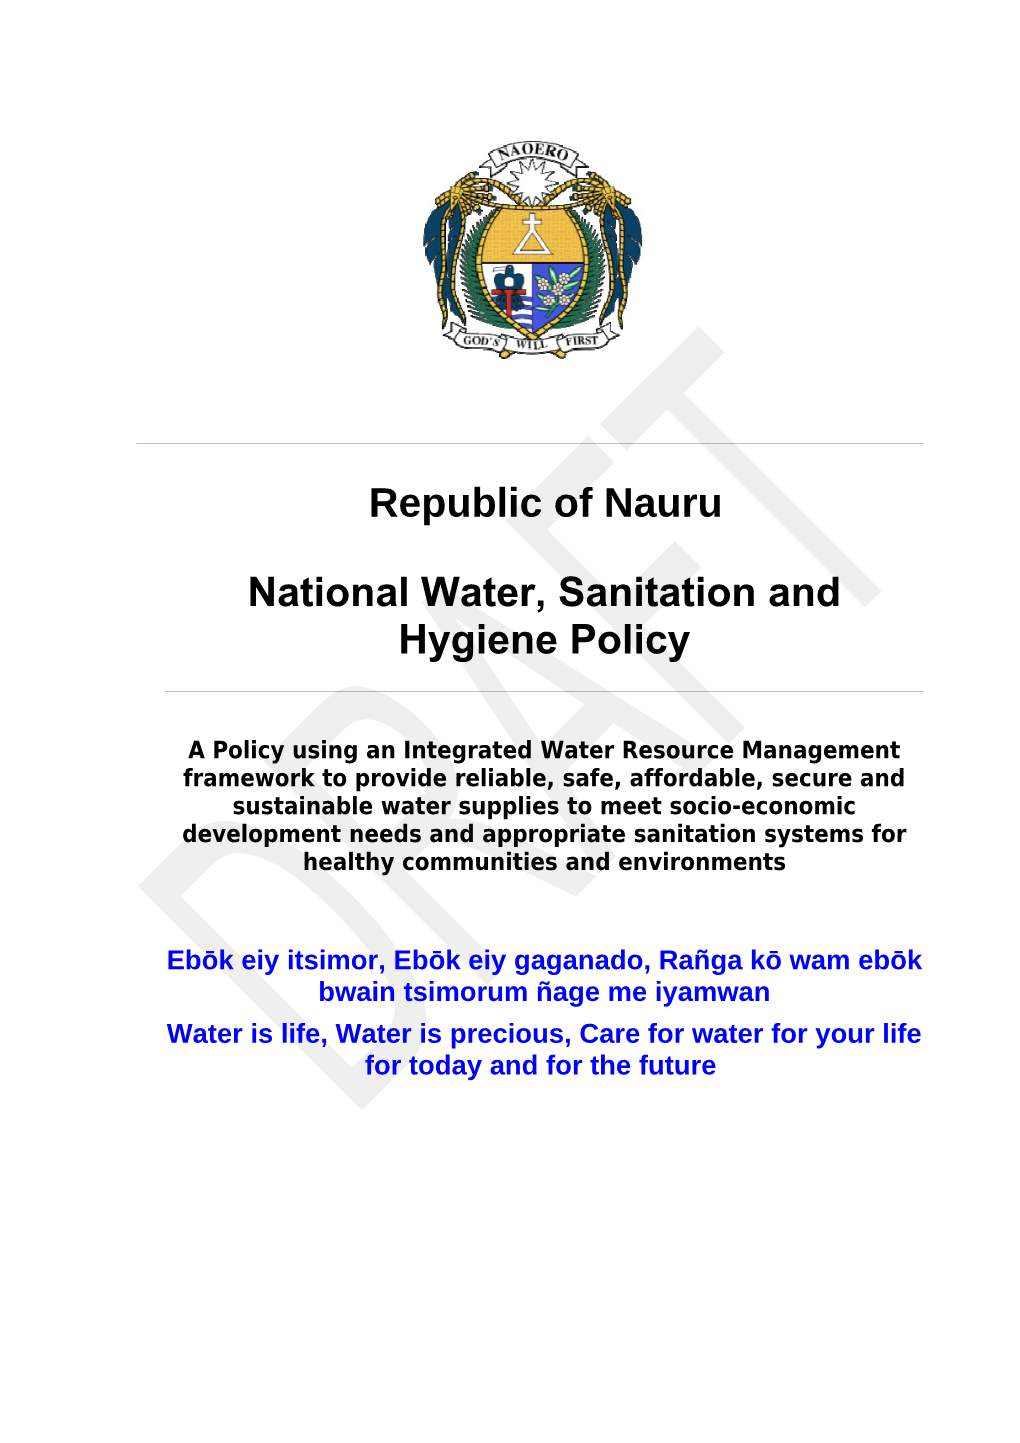 National Water, Sanitation and Hygiene Policy